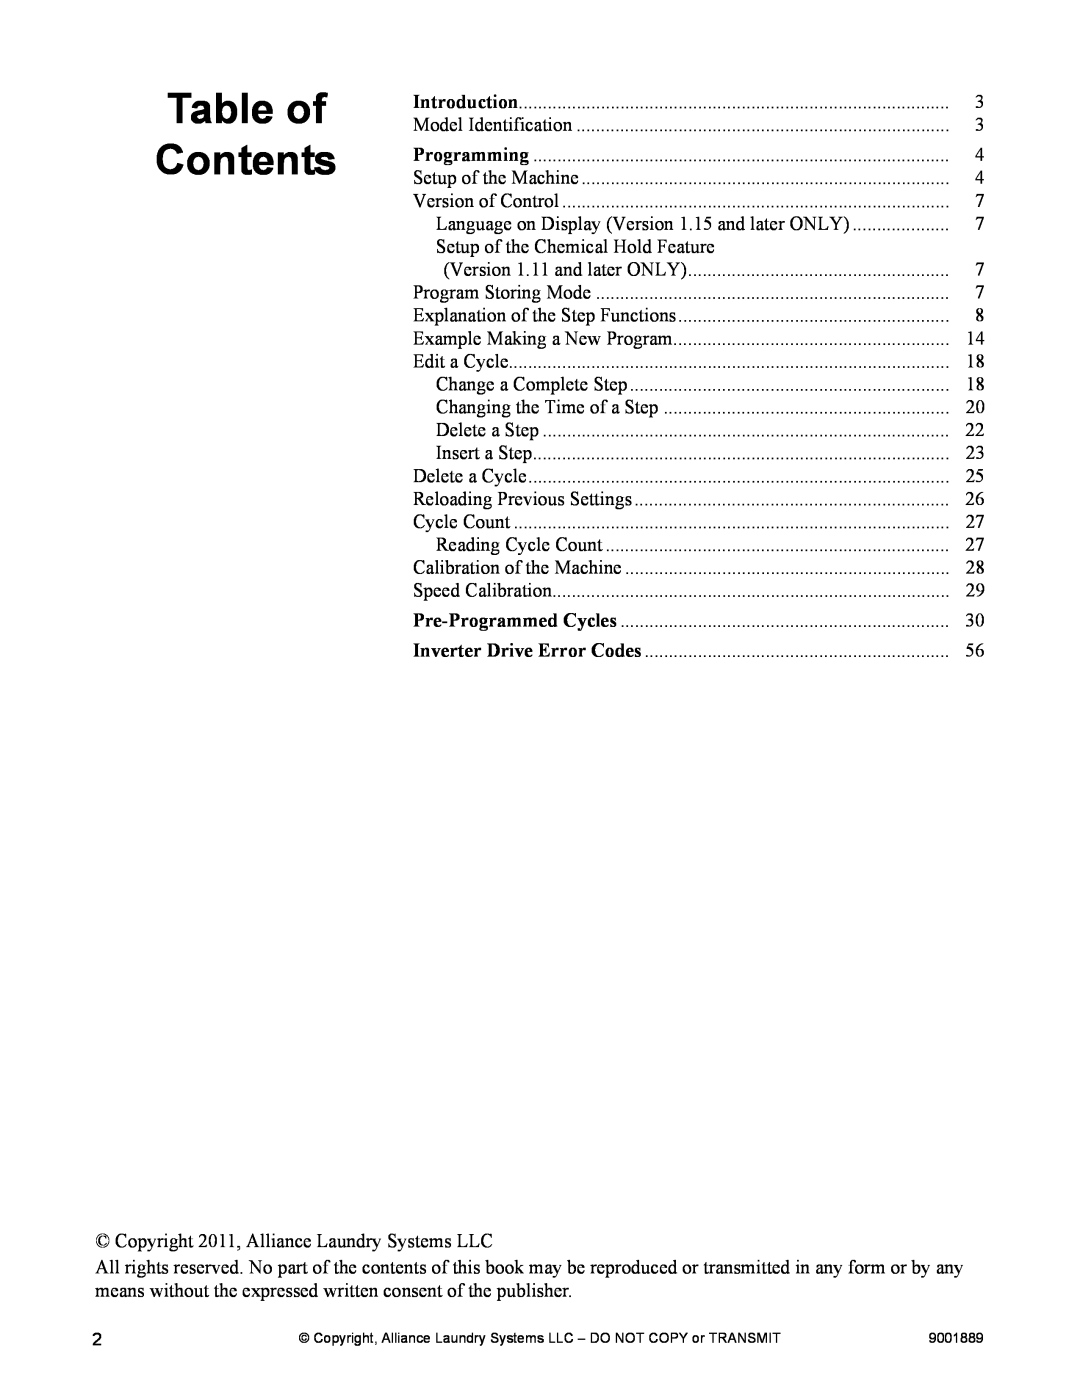 Alliance Laundry Systems 9001889R7 manual Table of Contents 